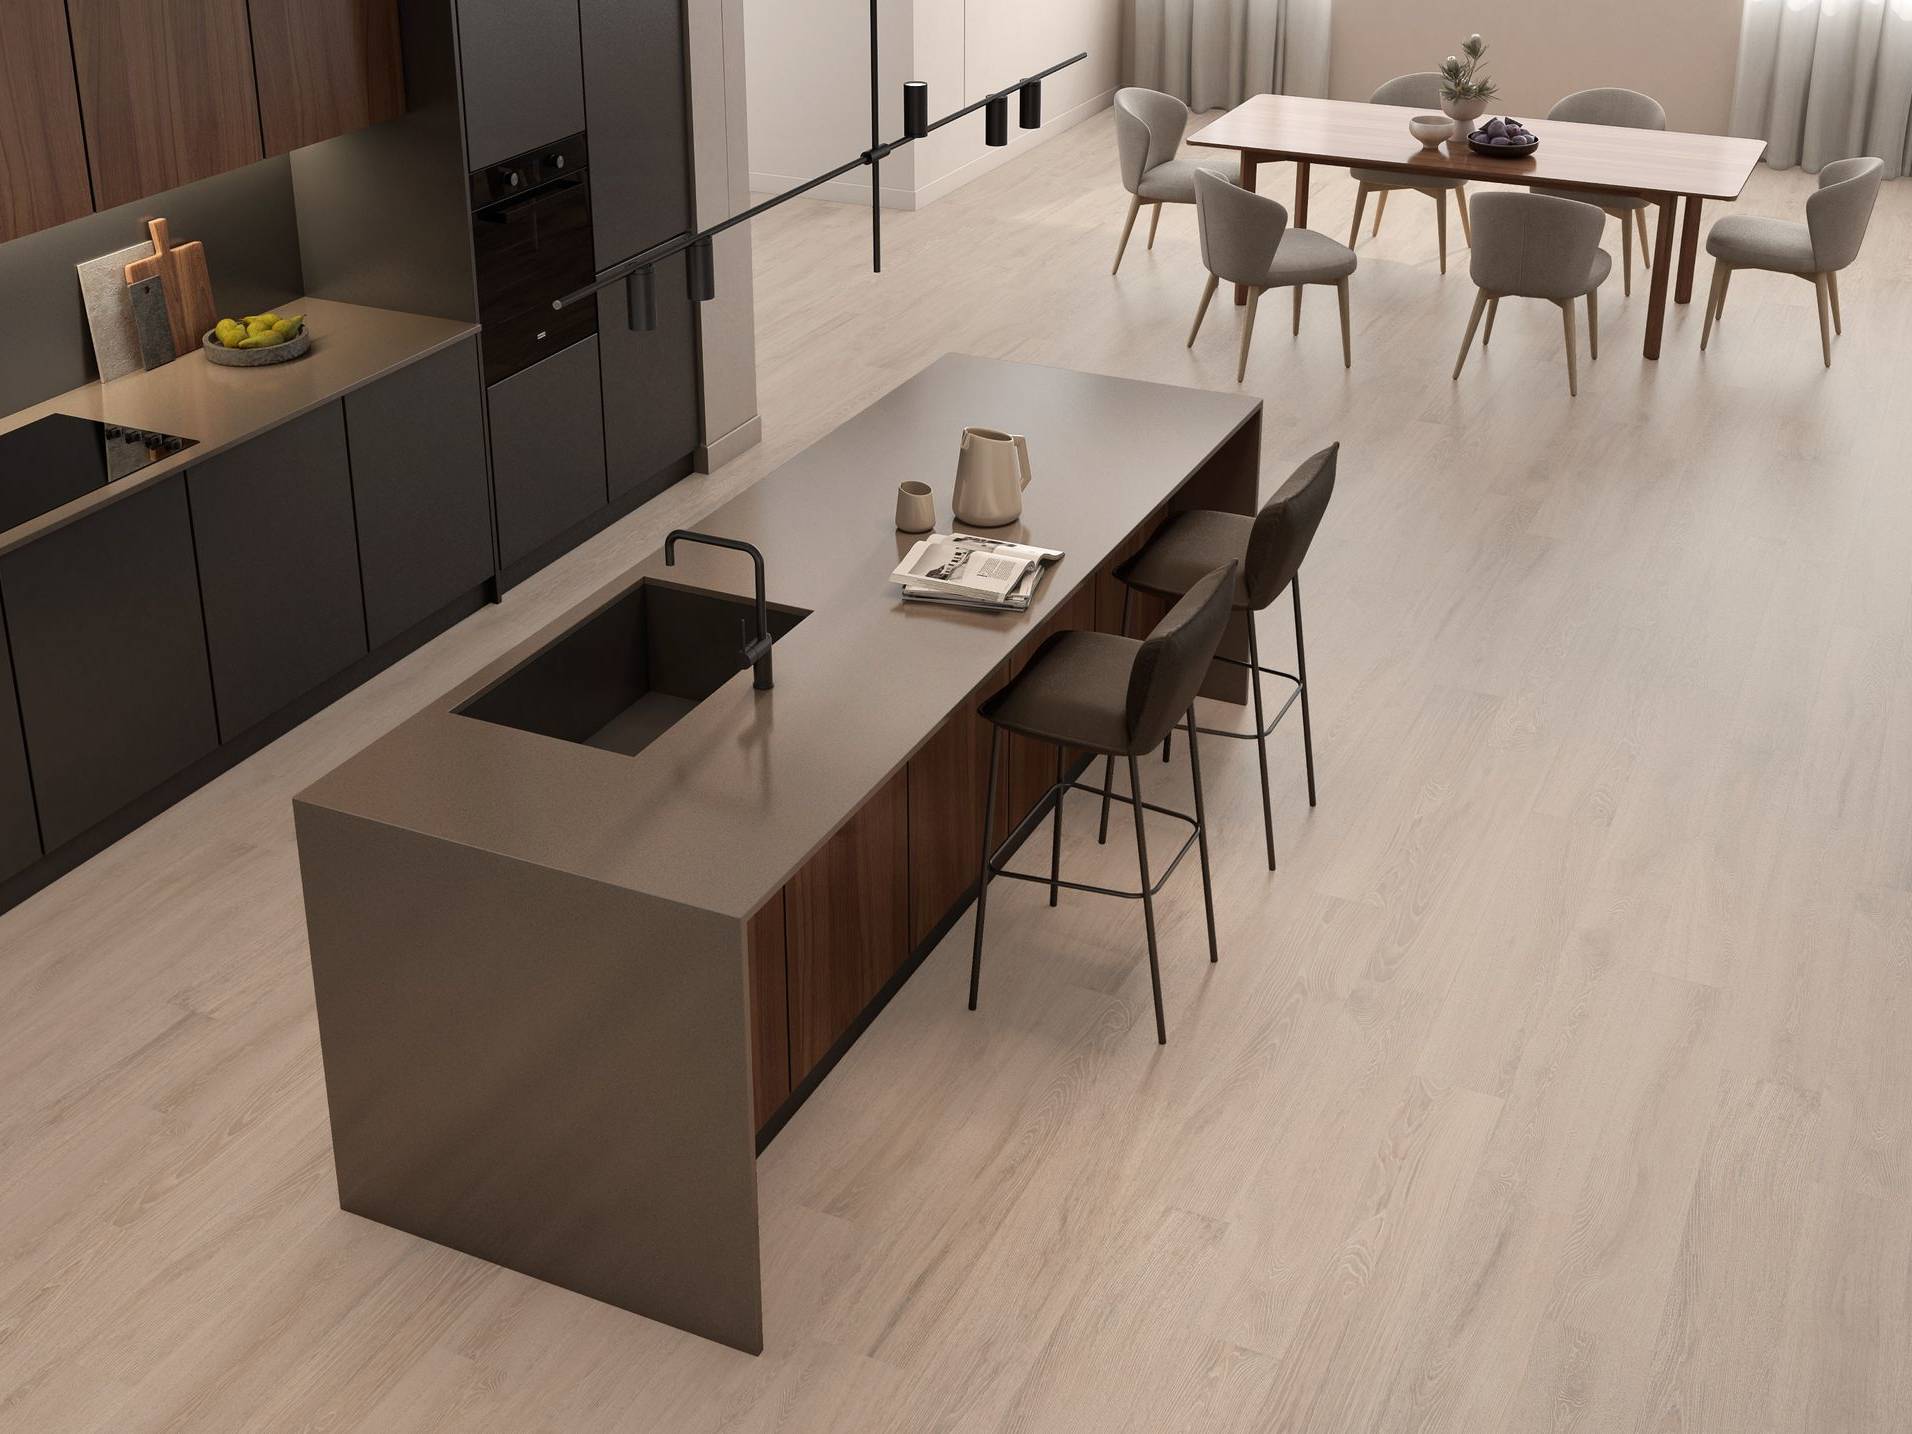 Woodlands 8X48 Haya 1 | Qualis Ceramica | Luxury Tile and Vinyl at affordable prices